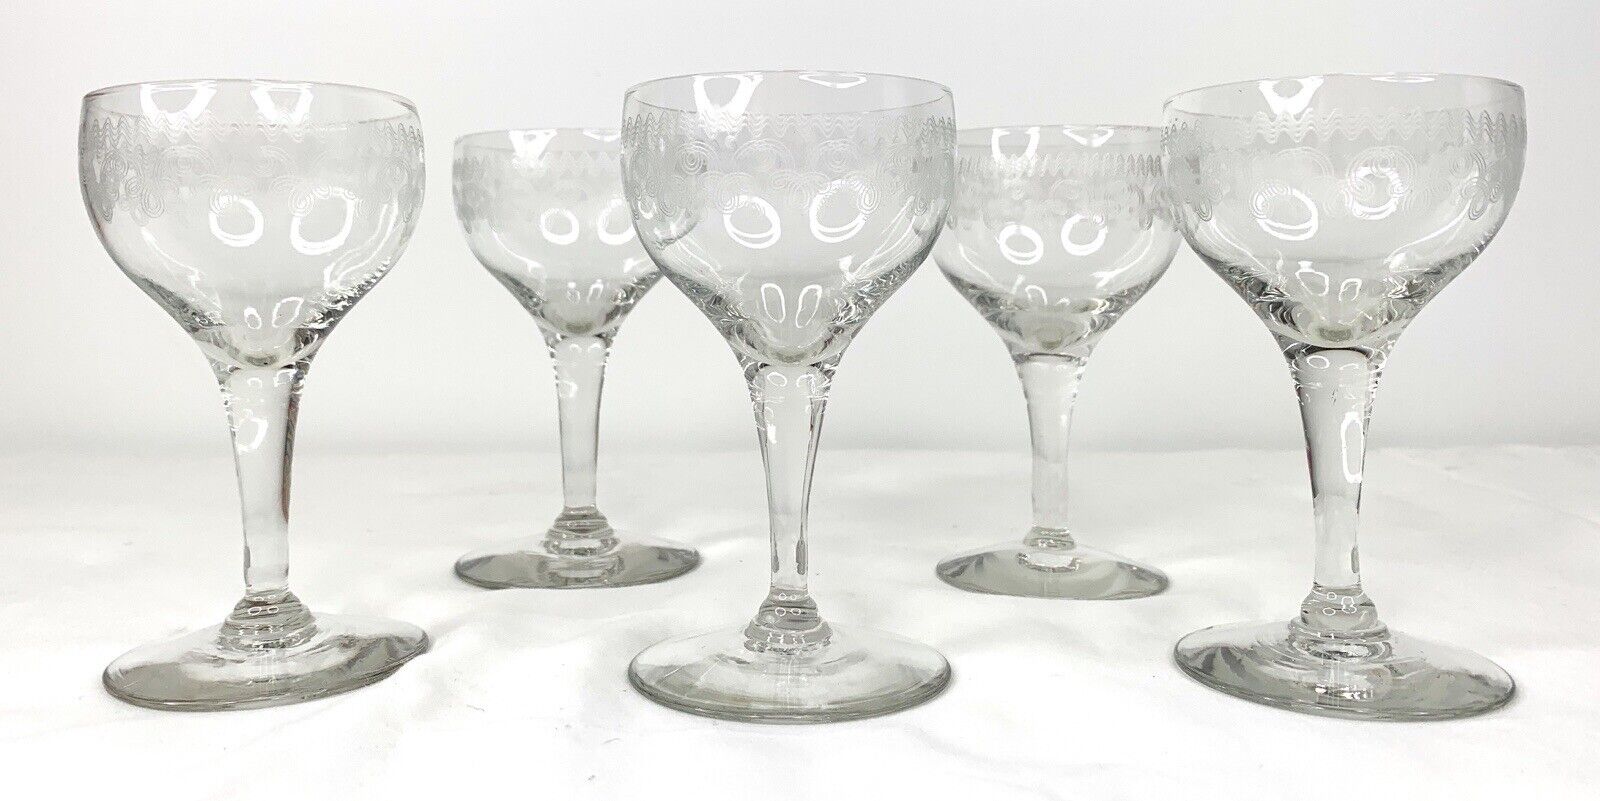 Antique Bryce Cordial Liquor Stem Glasses Needle Etched Set of 5 Early 1900's 